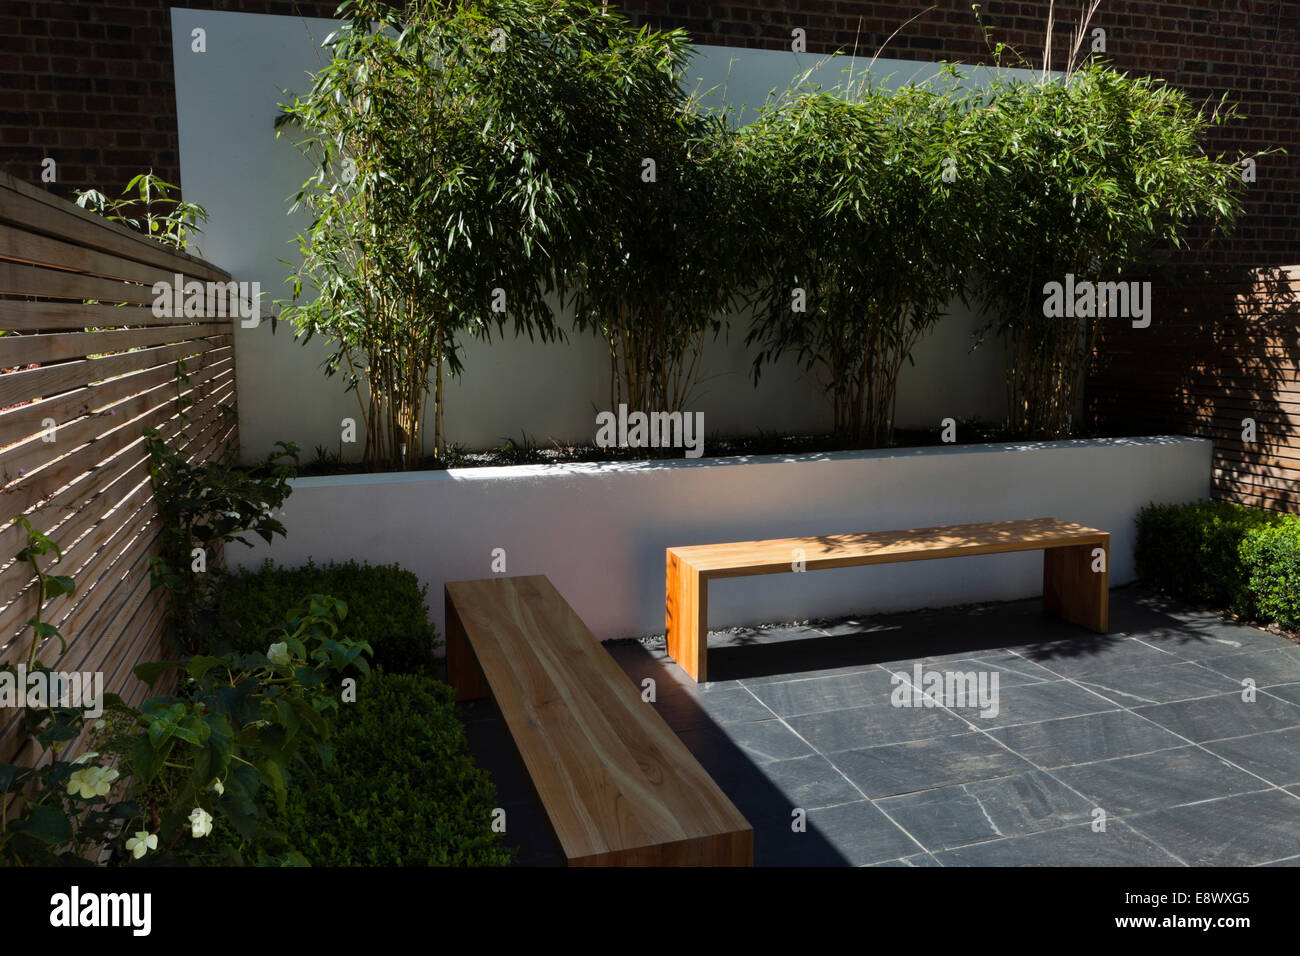 Compact, contemporary town garden patio in the Islington area of North London, UK, designed by Modular. With retaining wall containing raised bed planted with bamboos, underplanted with ophiopogon and clipped box hedging. Wooden benches in the minimalist Stock Photo